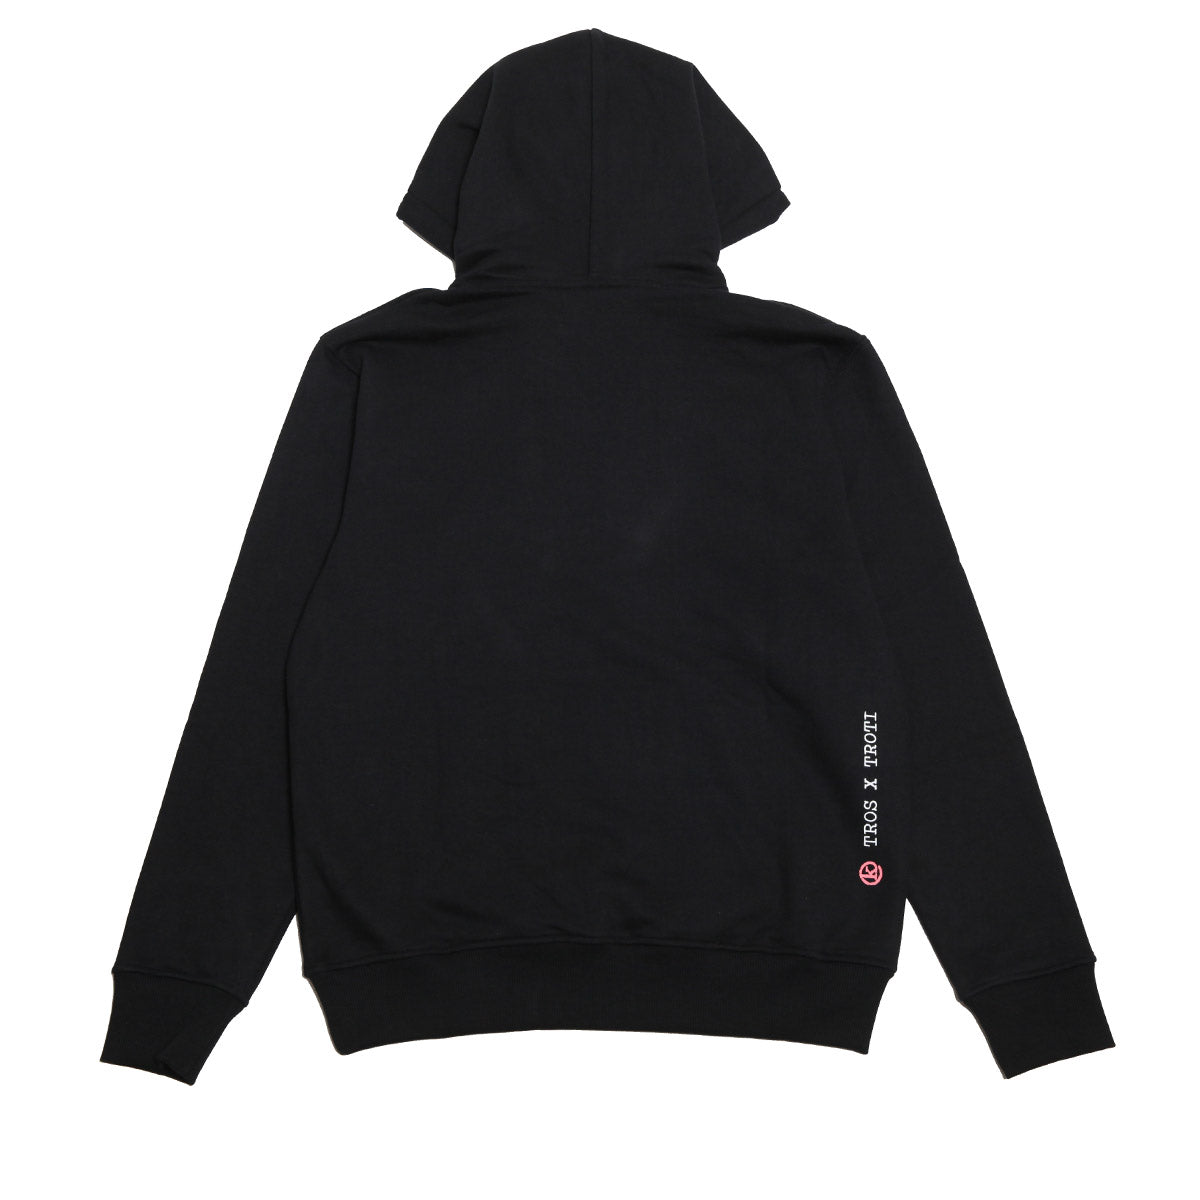 Kong Scaring The Nation Hoodie Black